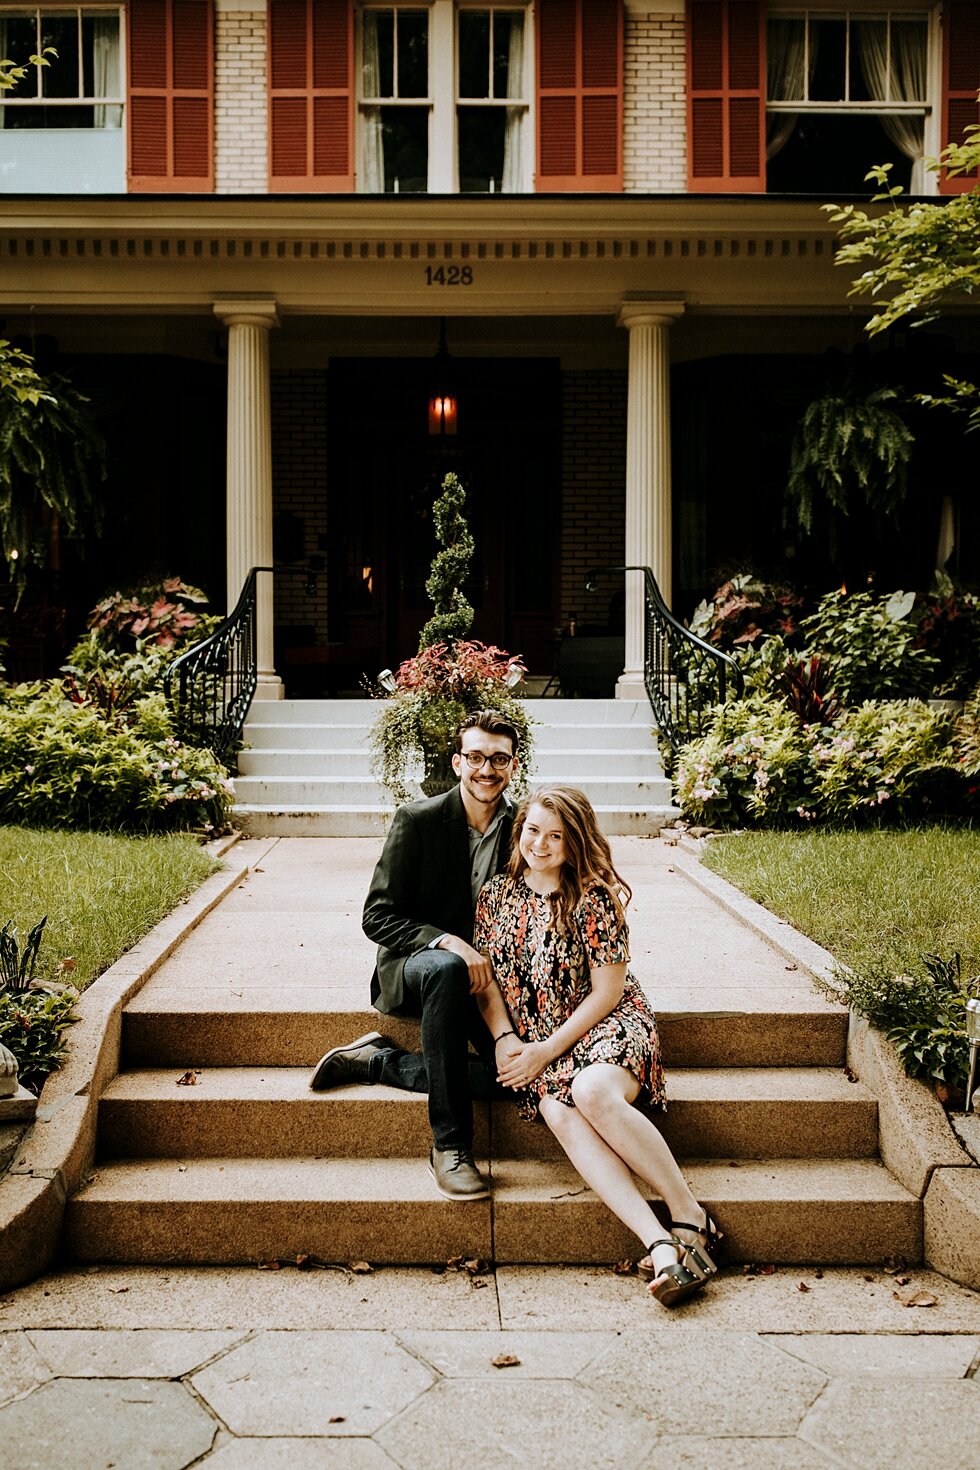  Couple sitting on the steps celebrating their engagement. getting married outdoor session engaged couple together wedding preparation love excited stunning relationship #engagementphotos #midwestphotographer #kywedding #louisville #stjamescourt #sum